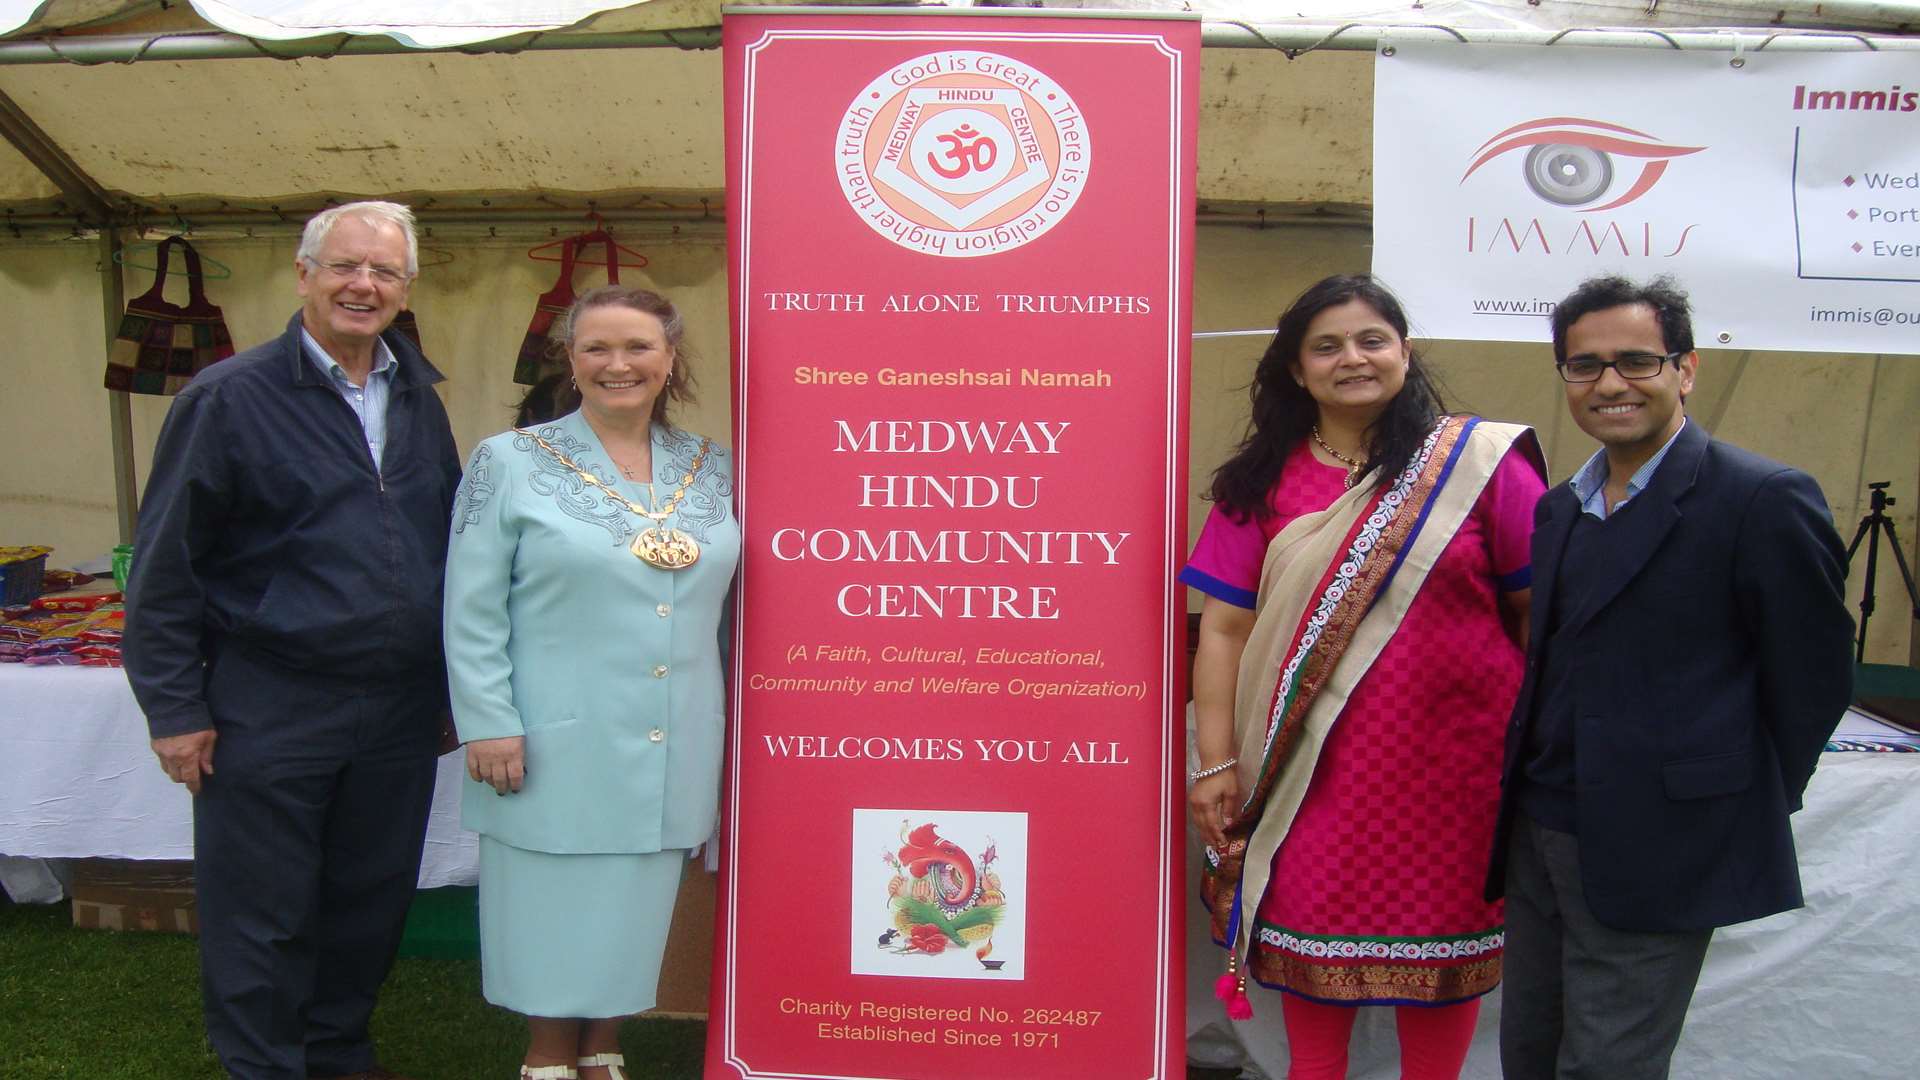 Cllr O'Brien at the Medway Mela Festival in Gillingham in 2013 with Priti Joshi (second right)